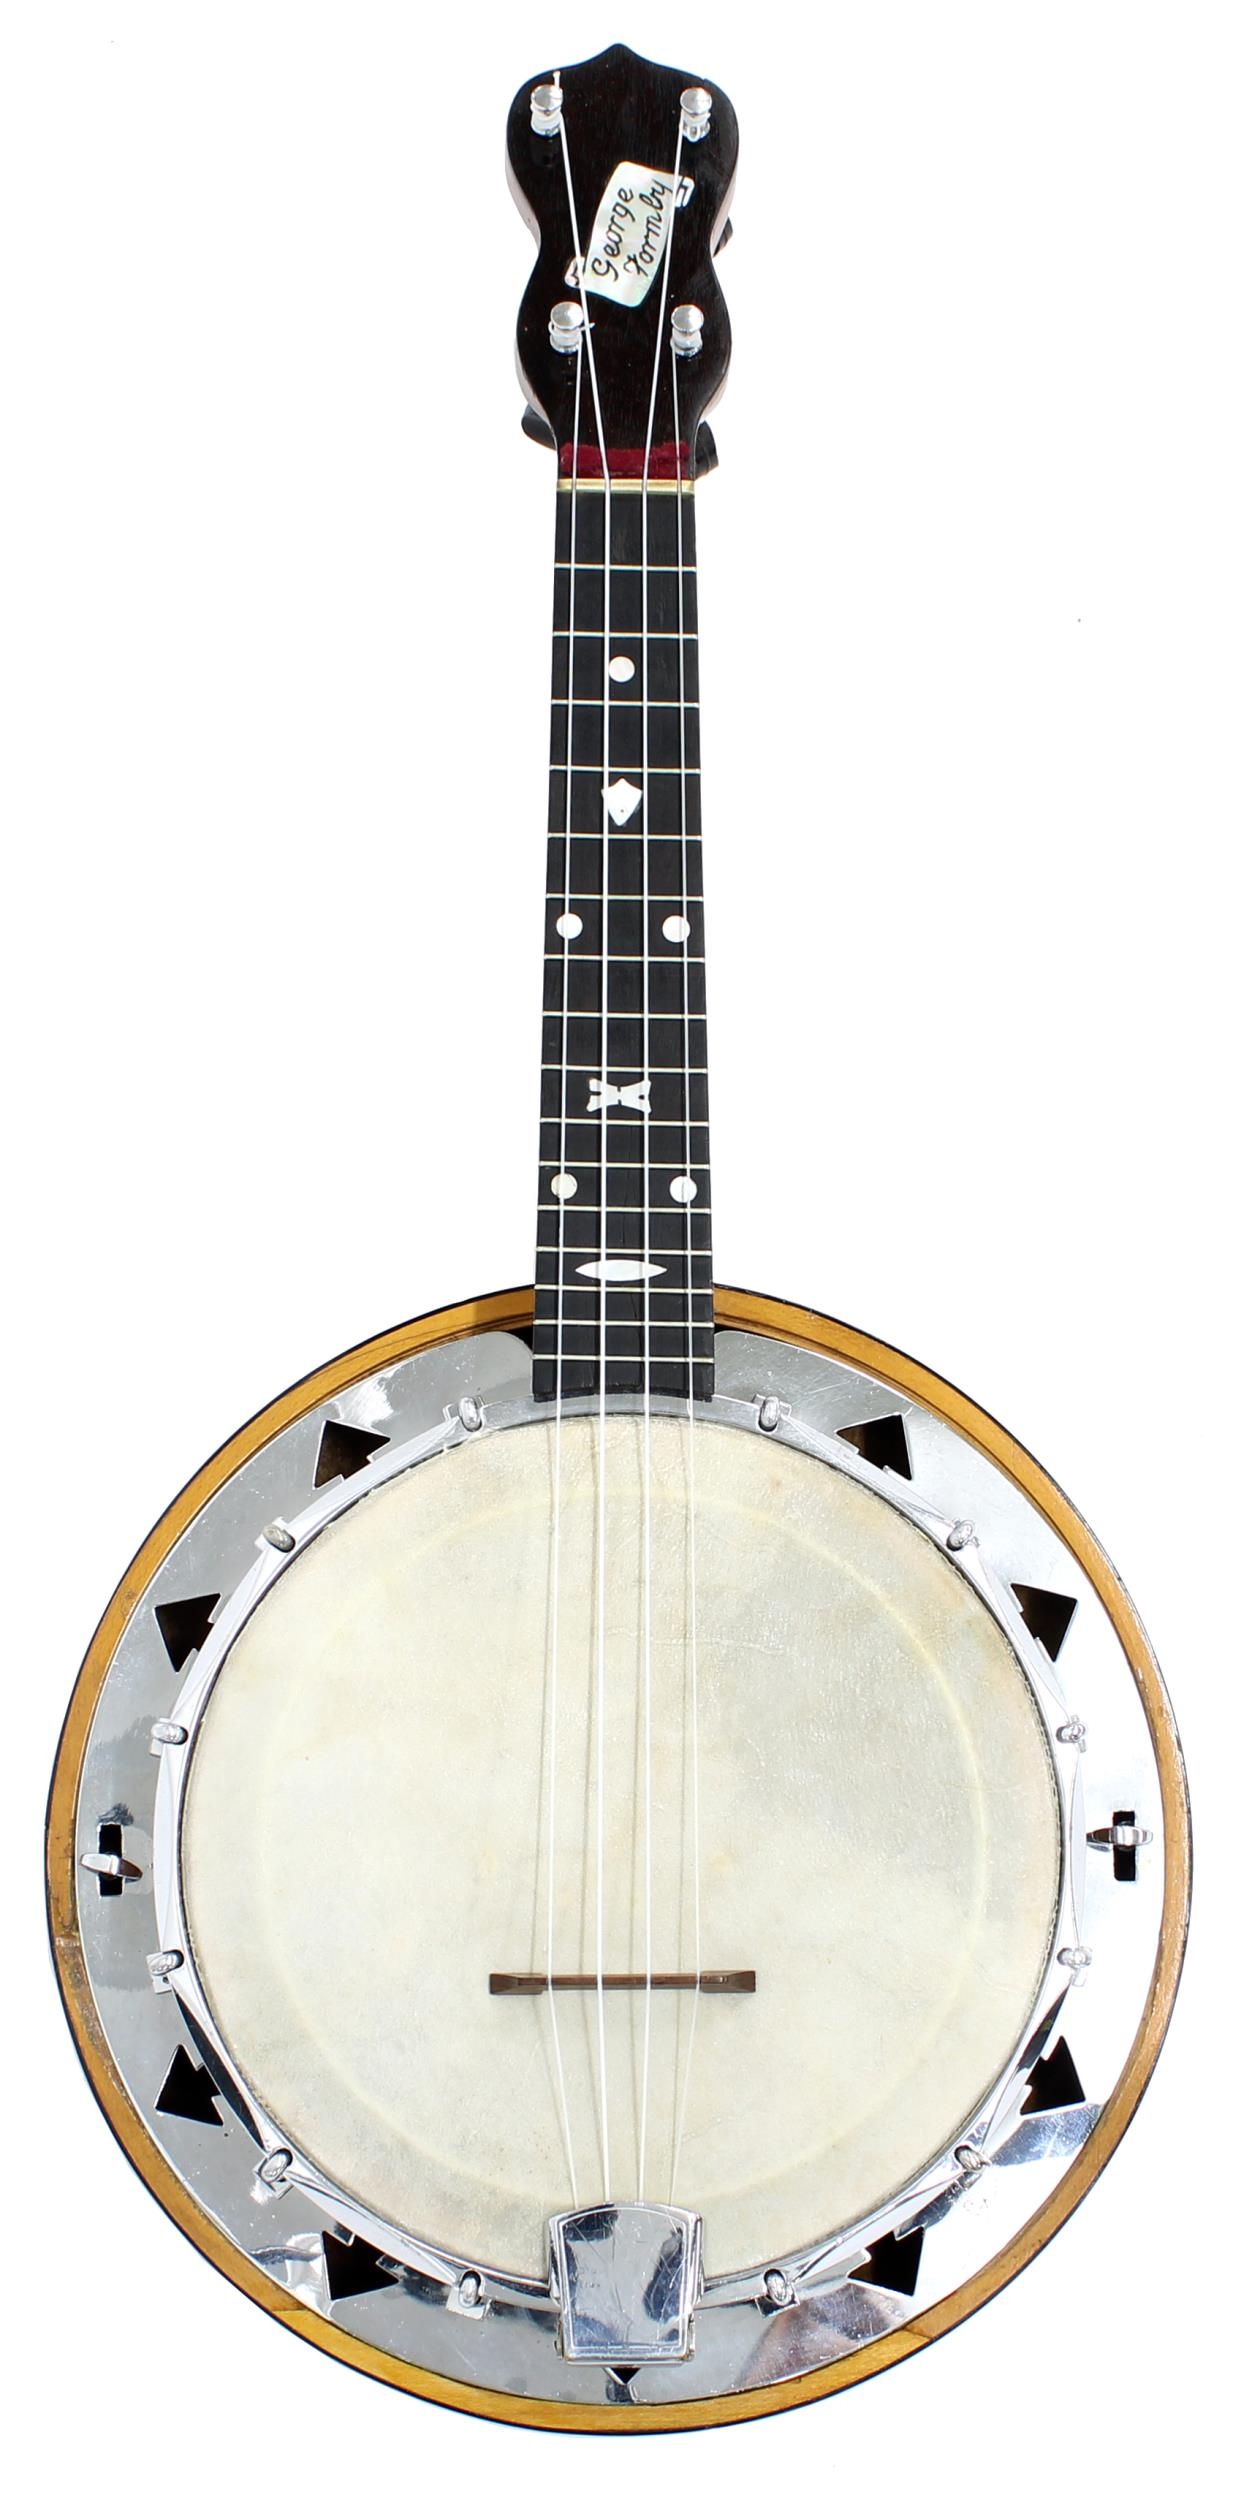 George Formby Dallas E banjolele, with geometric mother of pearl inlay to the fretboard, bearing